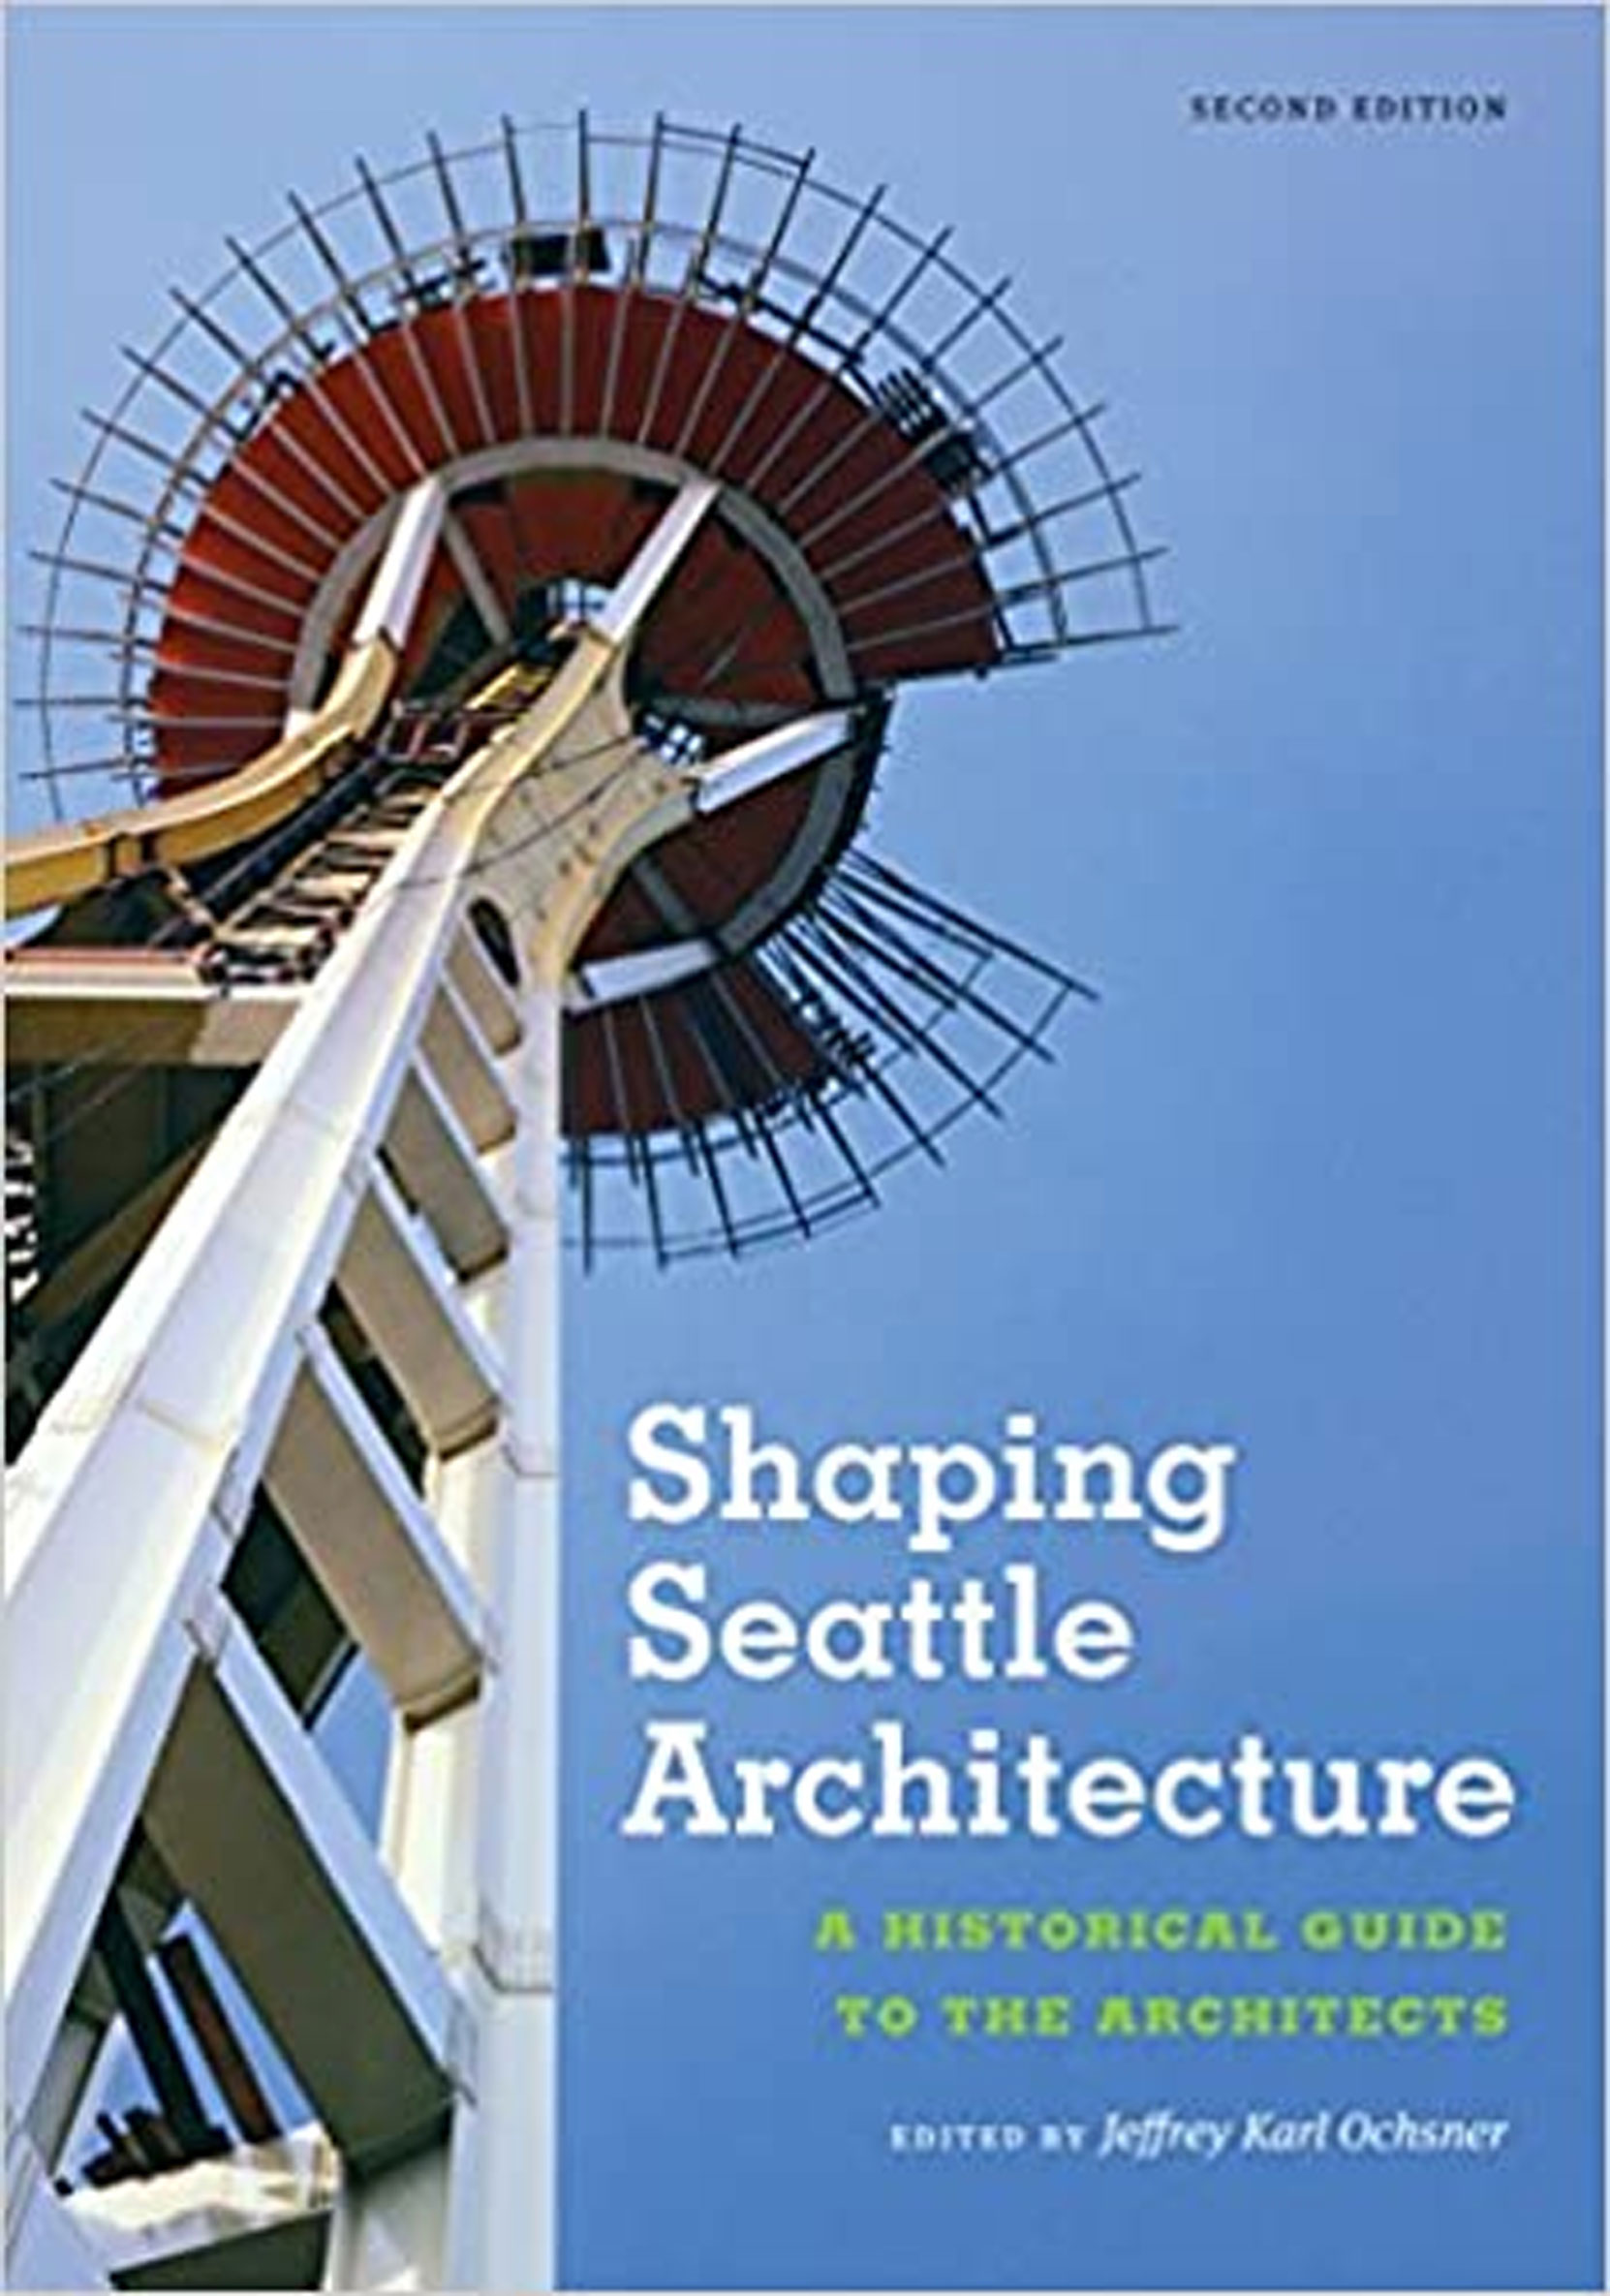 Shaping Seattle Architecture, 2nd edition, is one of the books in our Bibliography.